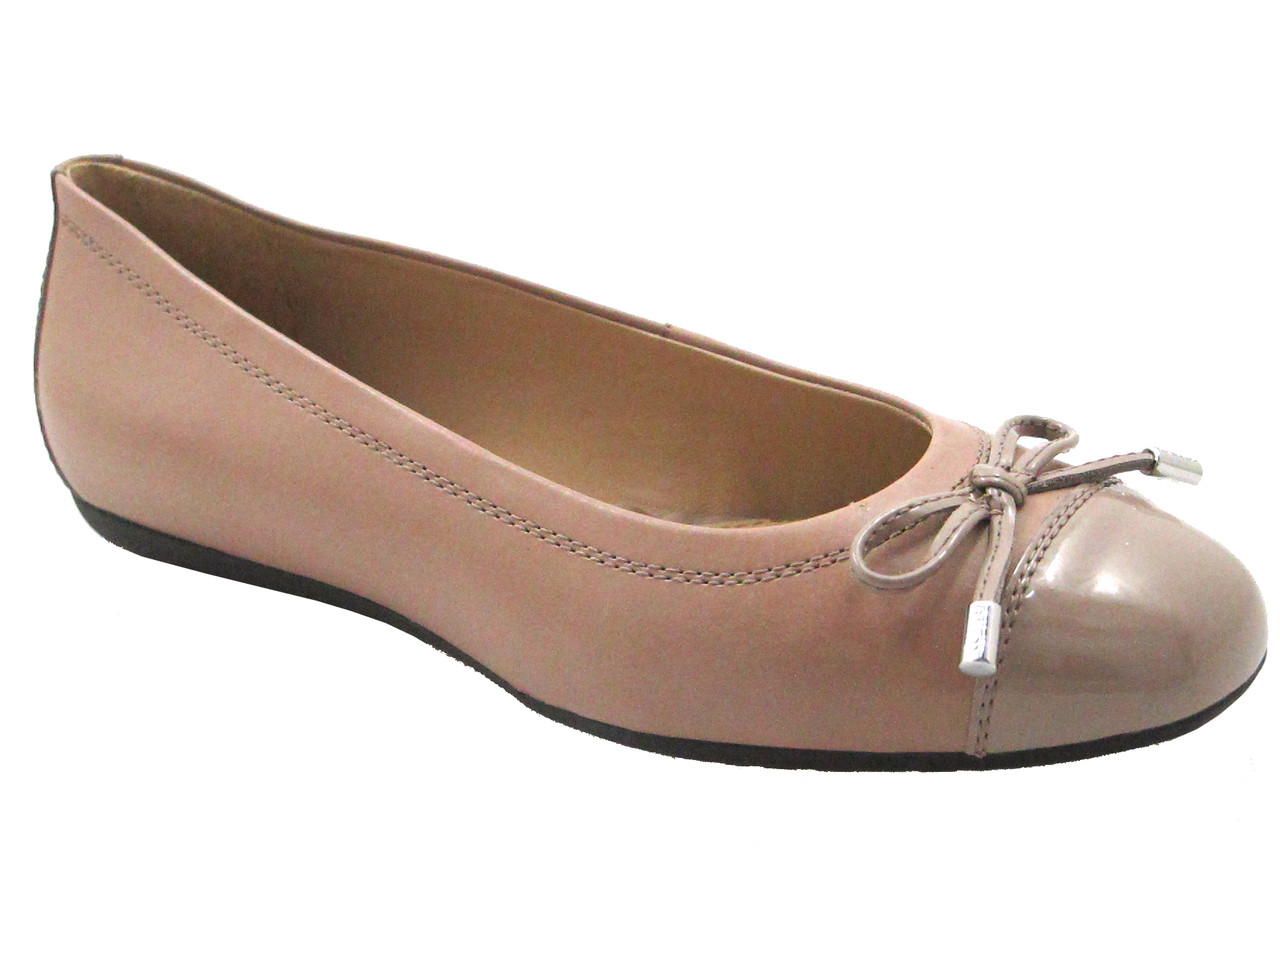 Geox Respira Dlola L - Nappa Patent Leather Flat Ballet shoes Grey or Black